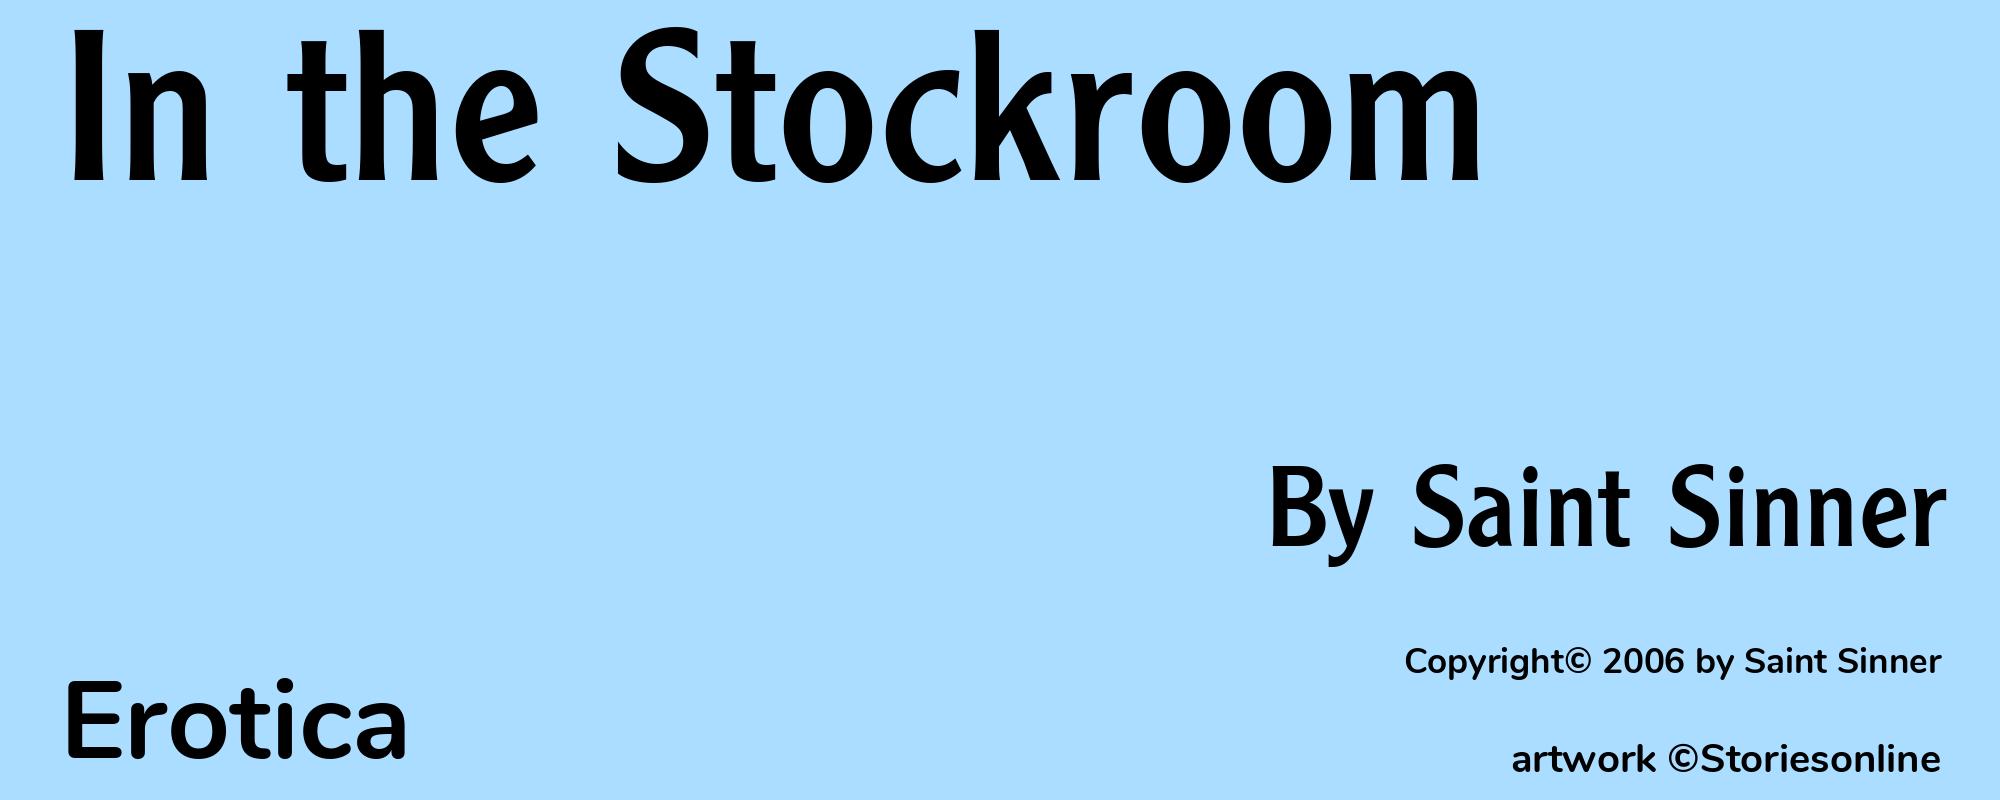 In the Stockroom - Cover